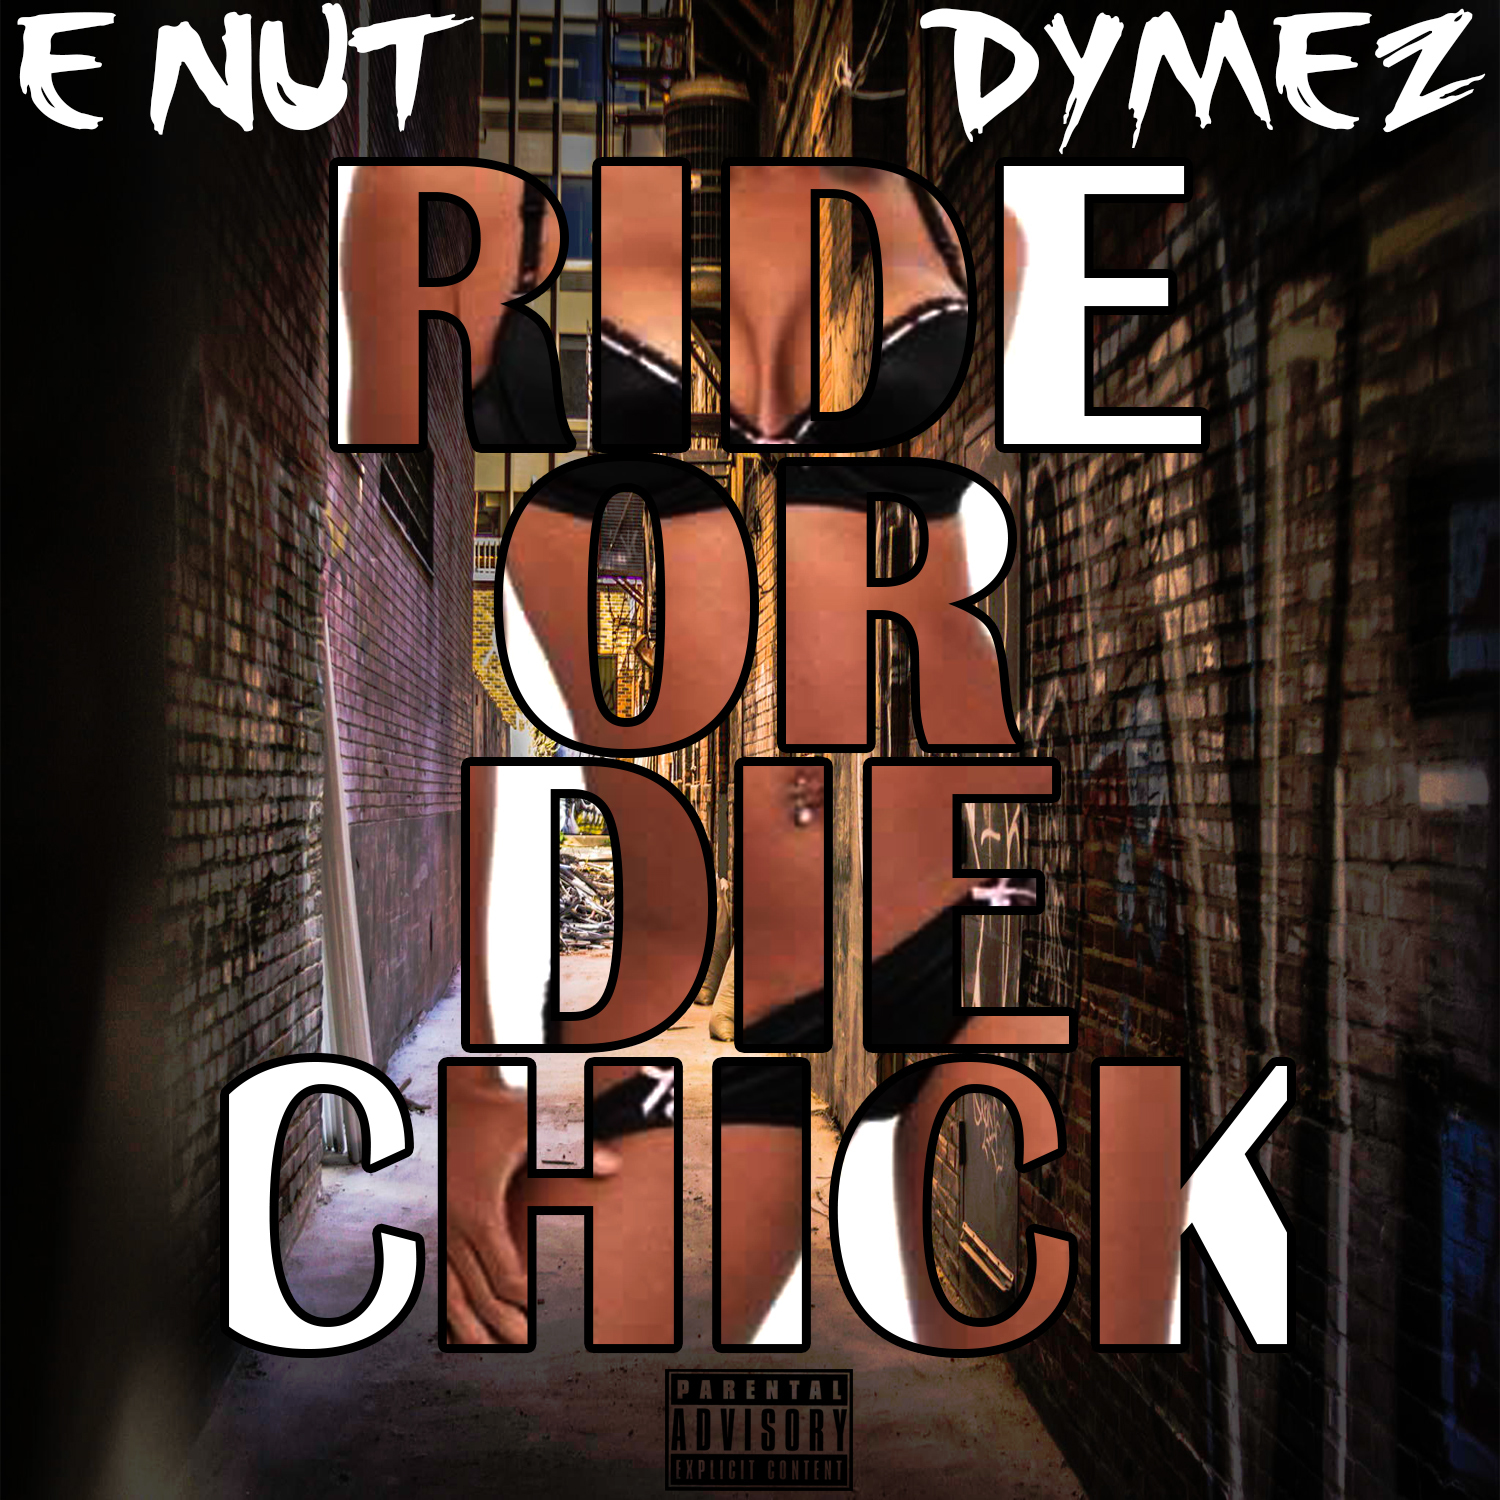 E-Nut of Josie Boi ft. Dymez of GutterBoy - Ride Or Die Chick [Thizzler.com]